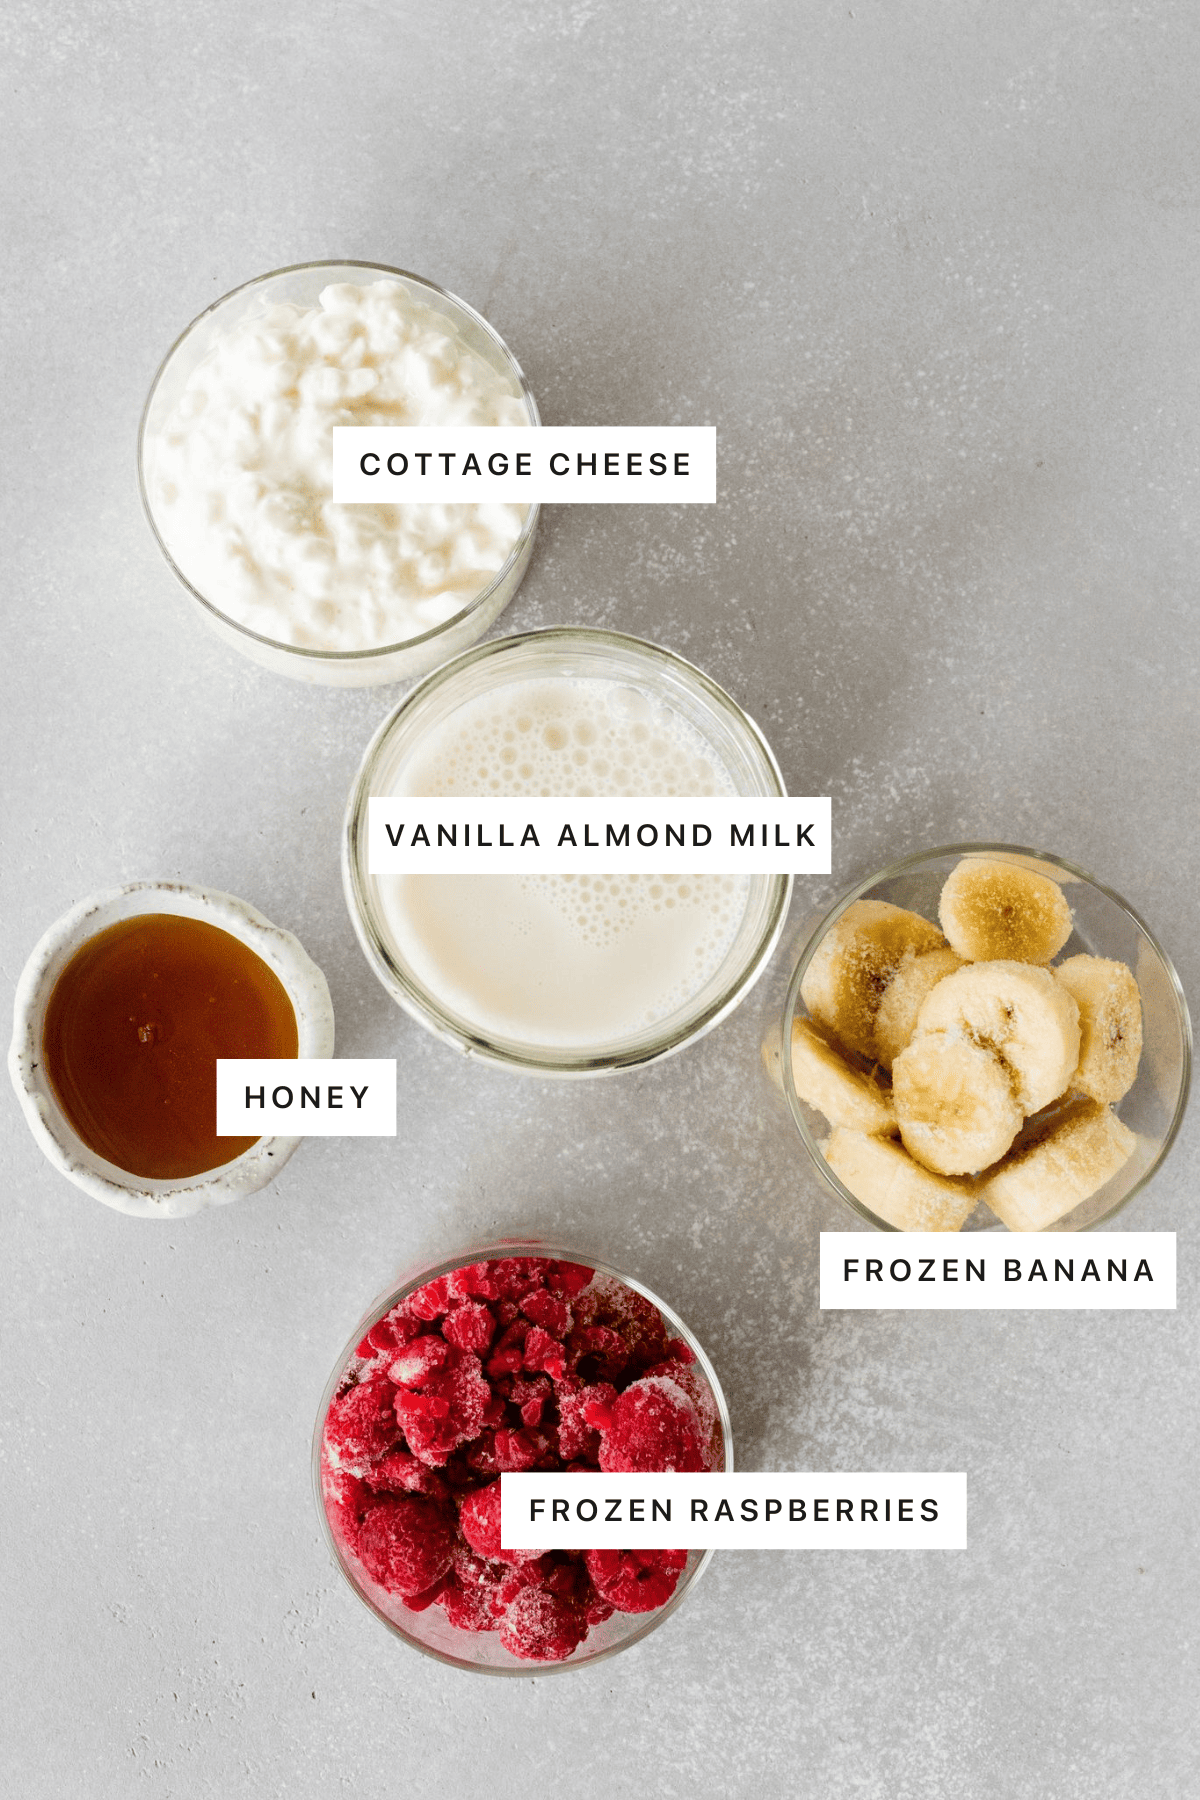 Ingredients for the cottage cheese smoothie: cottage cheese, almond milk, frozen bananas, frozen raspberries and honey.